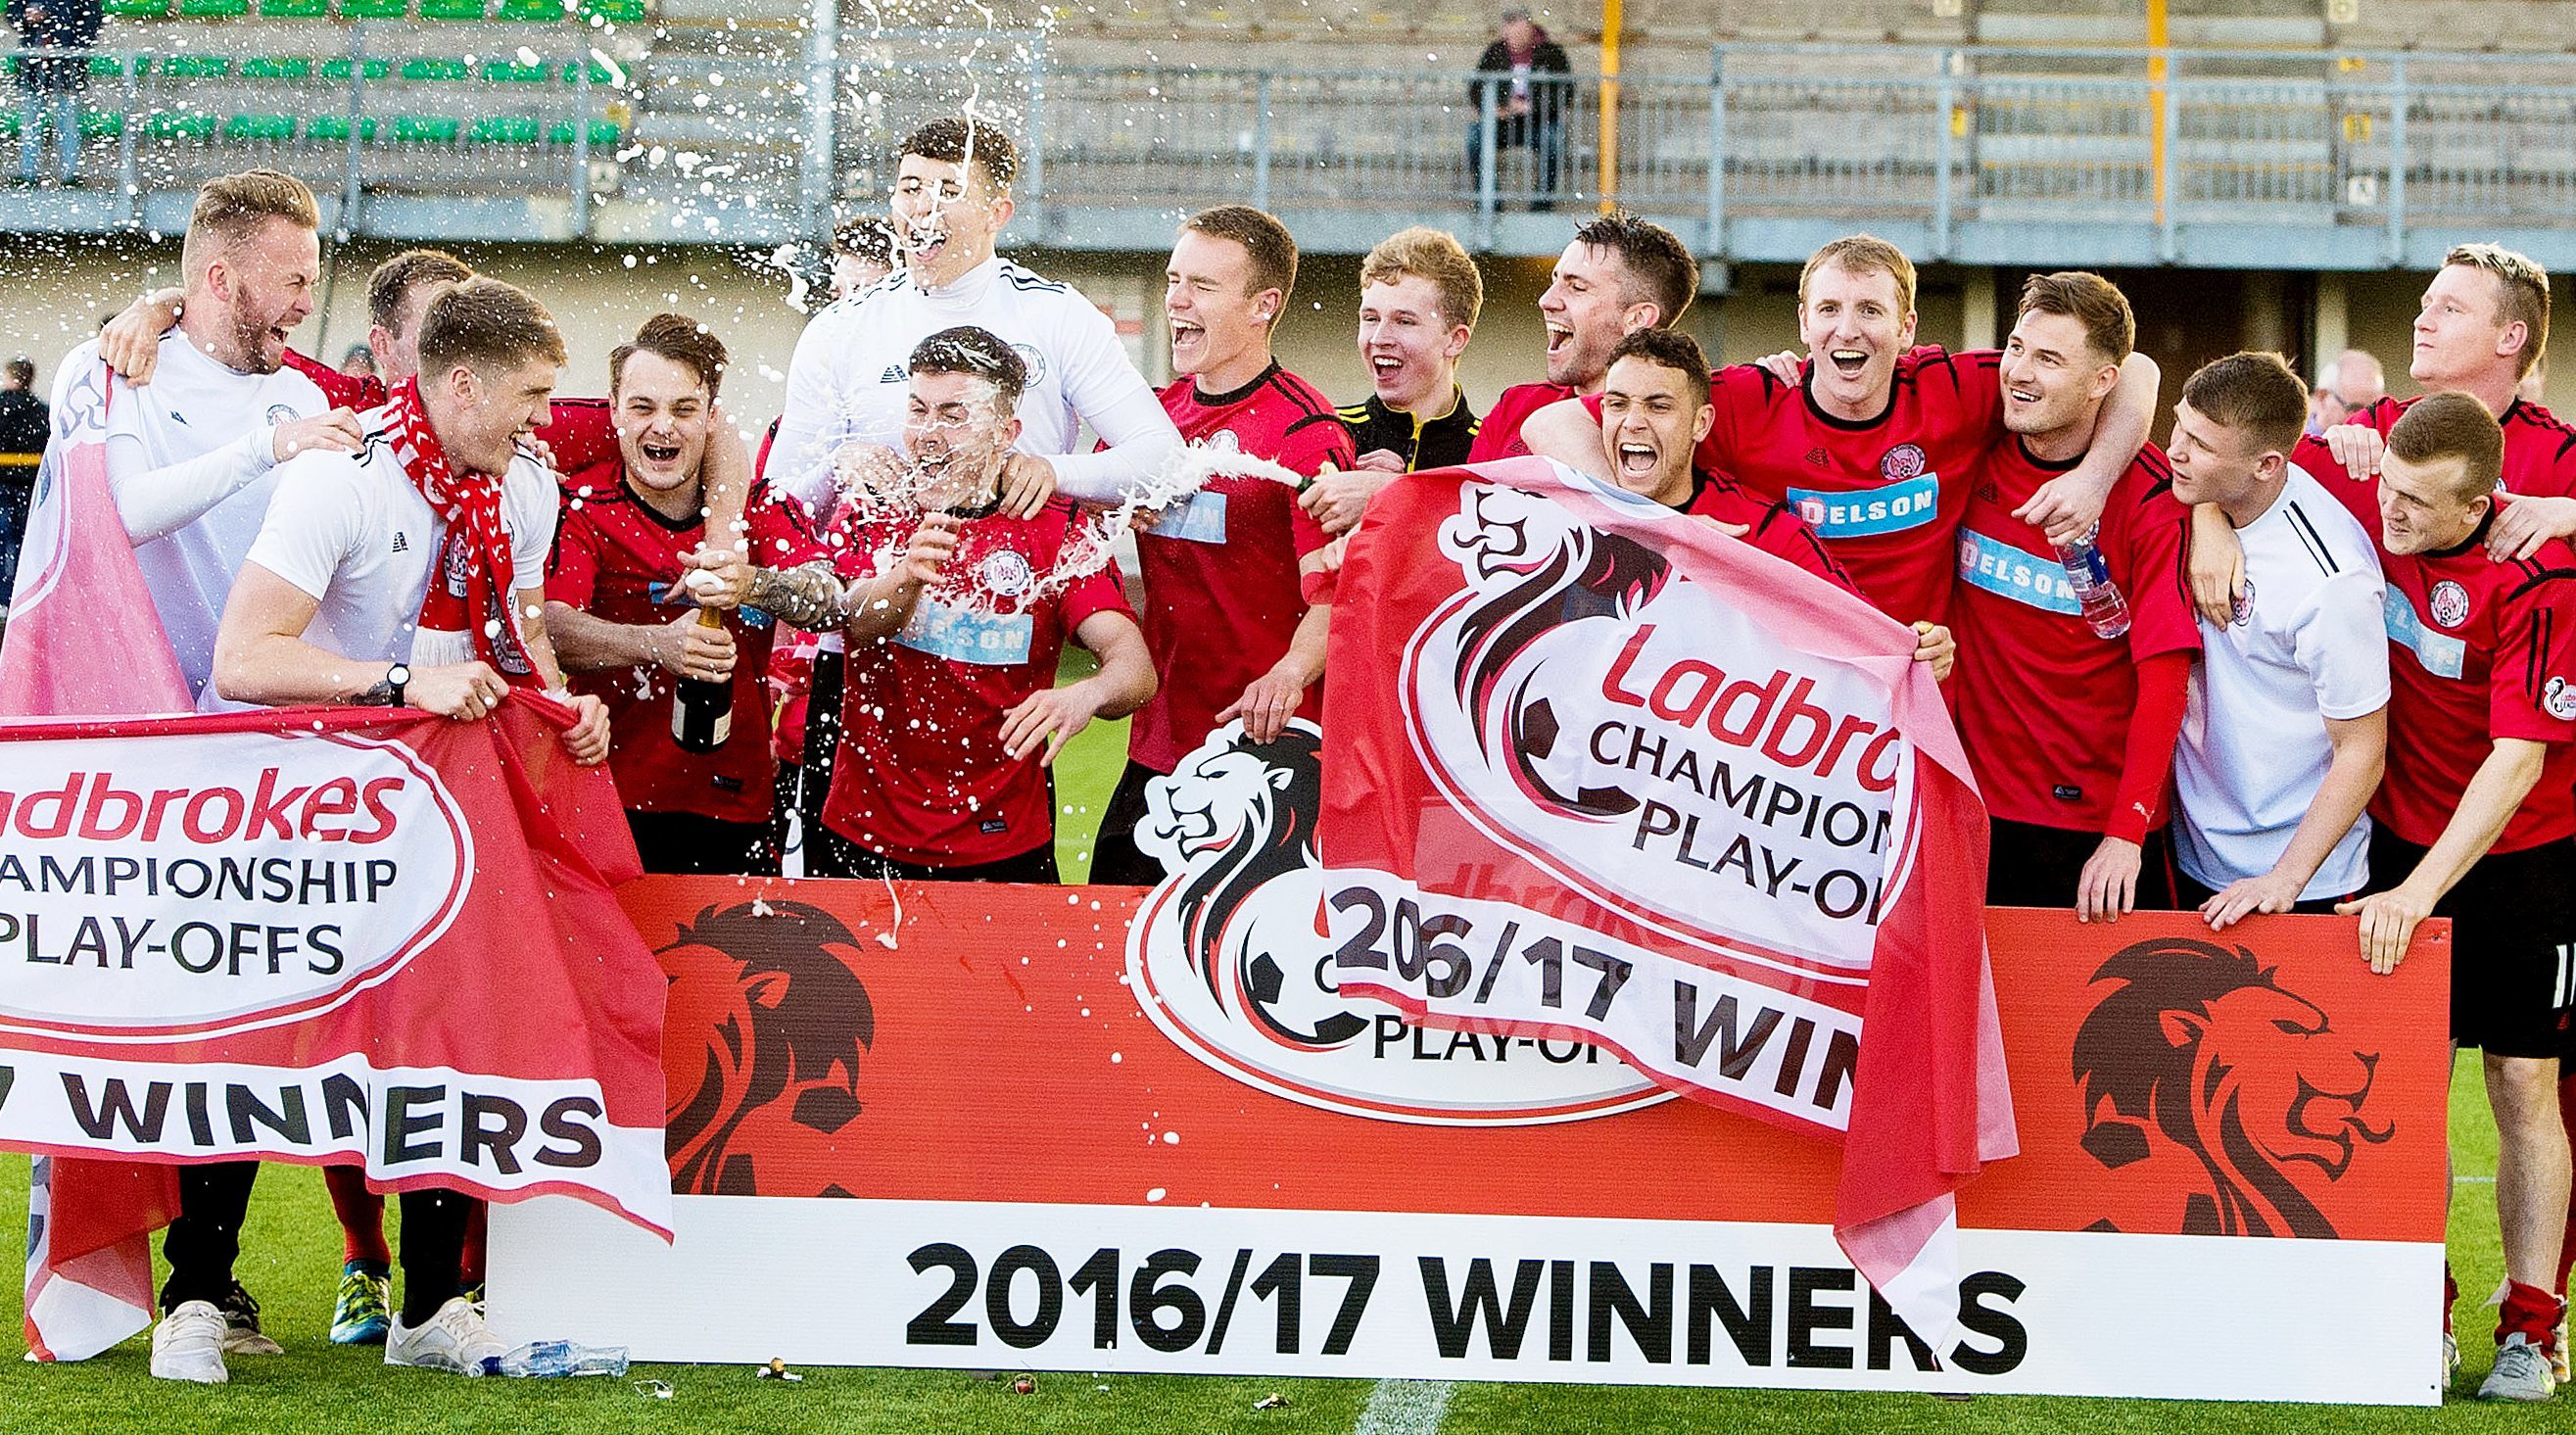 Brechin celebrate at full-time as they are promoted to the Ladbrokes Championship.